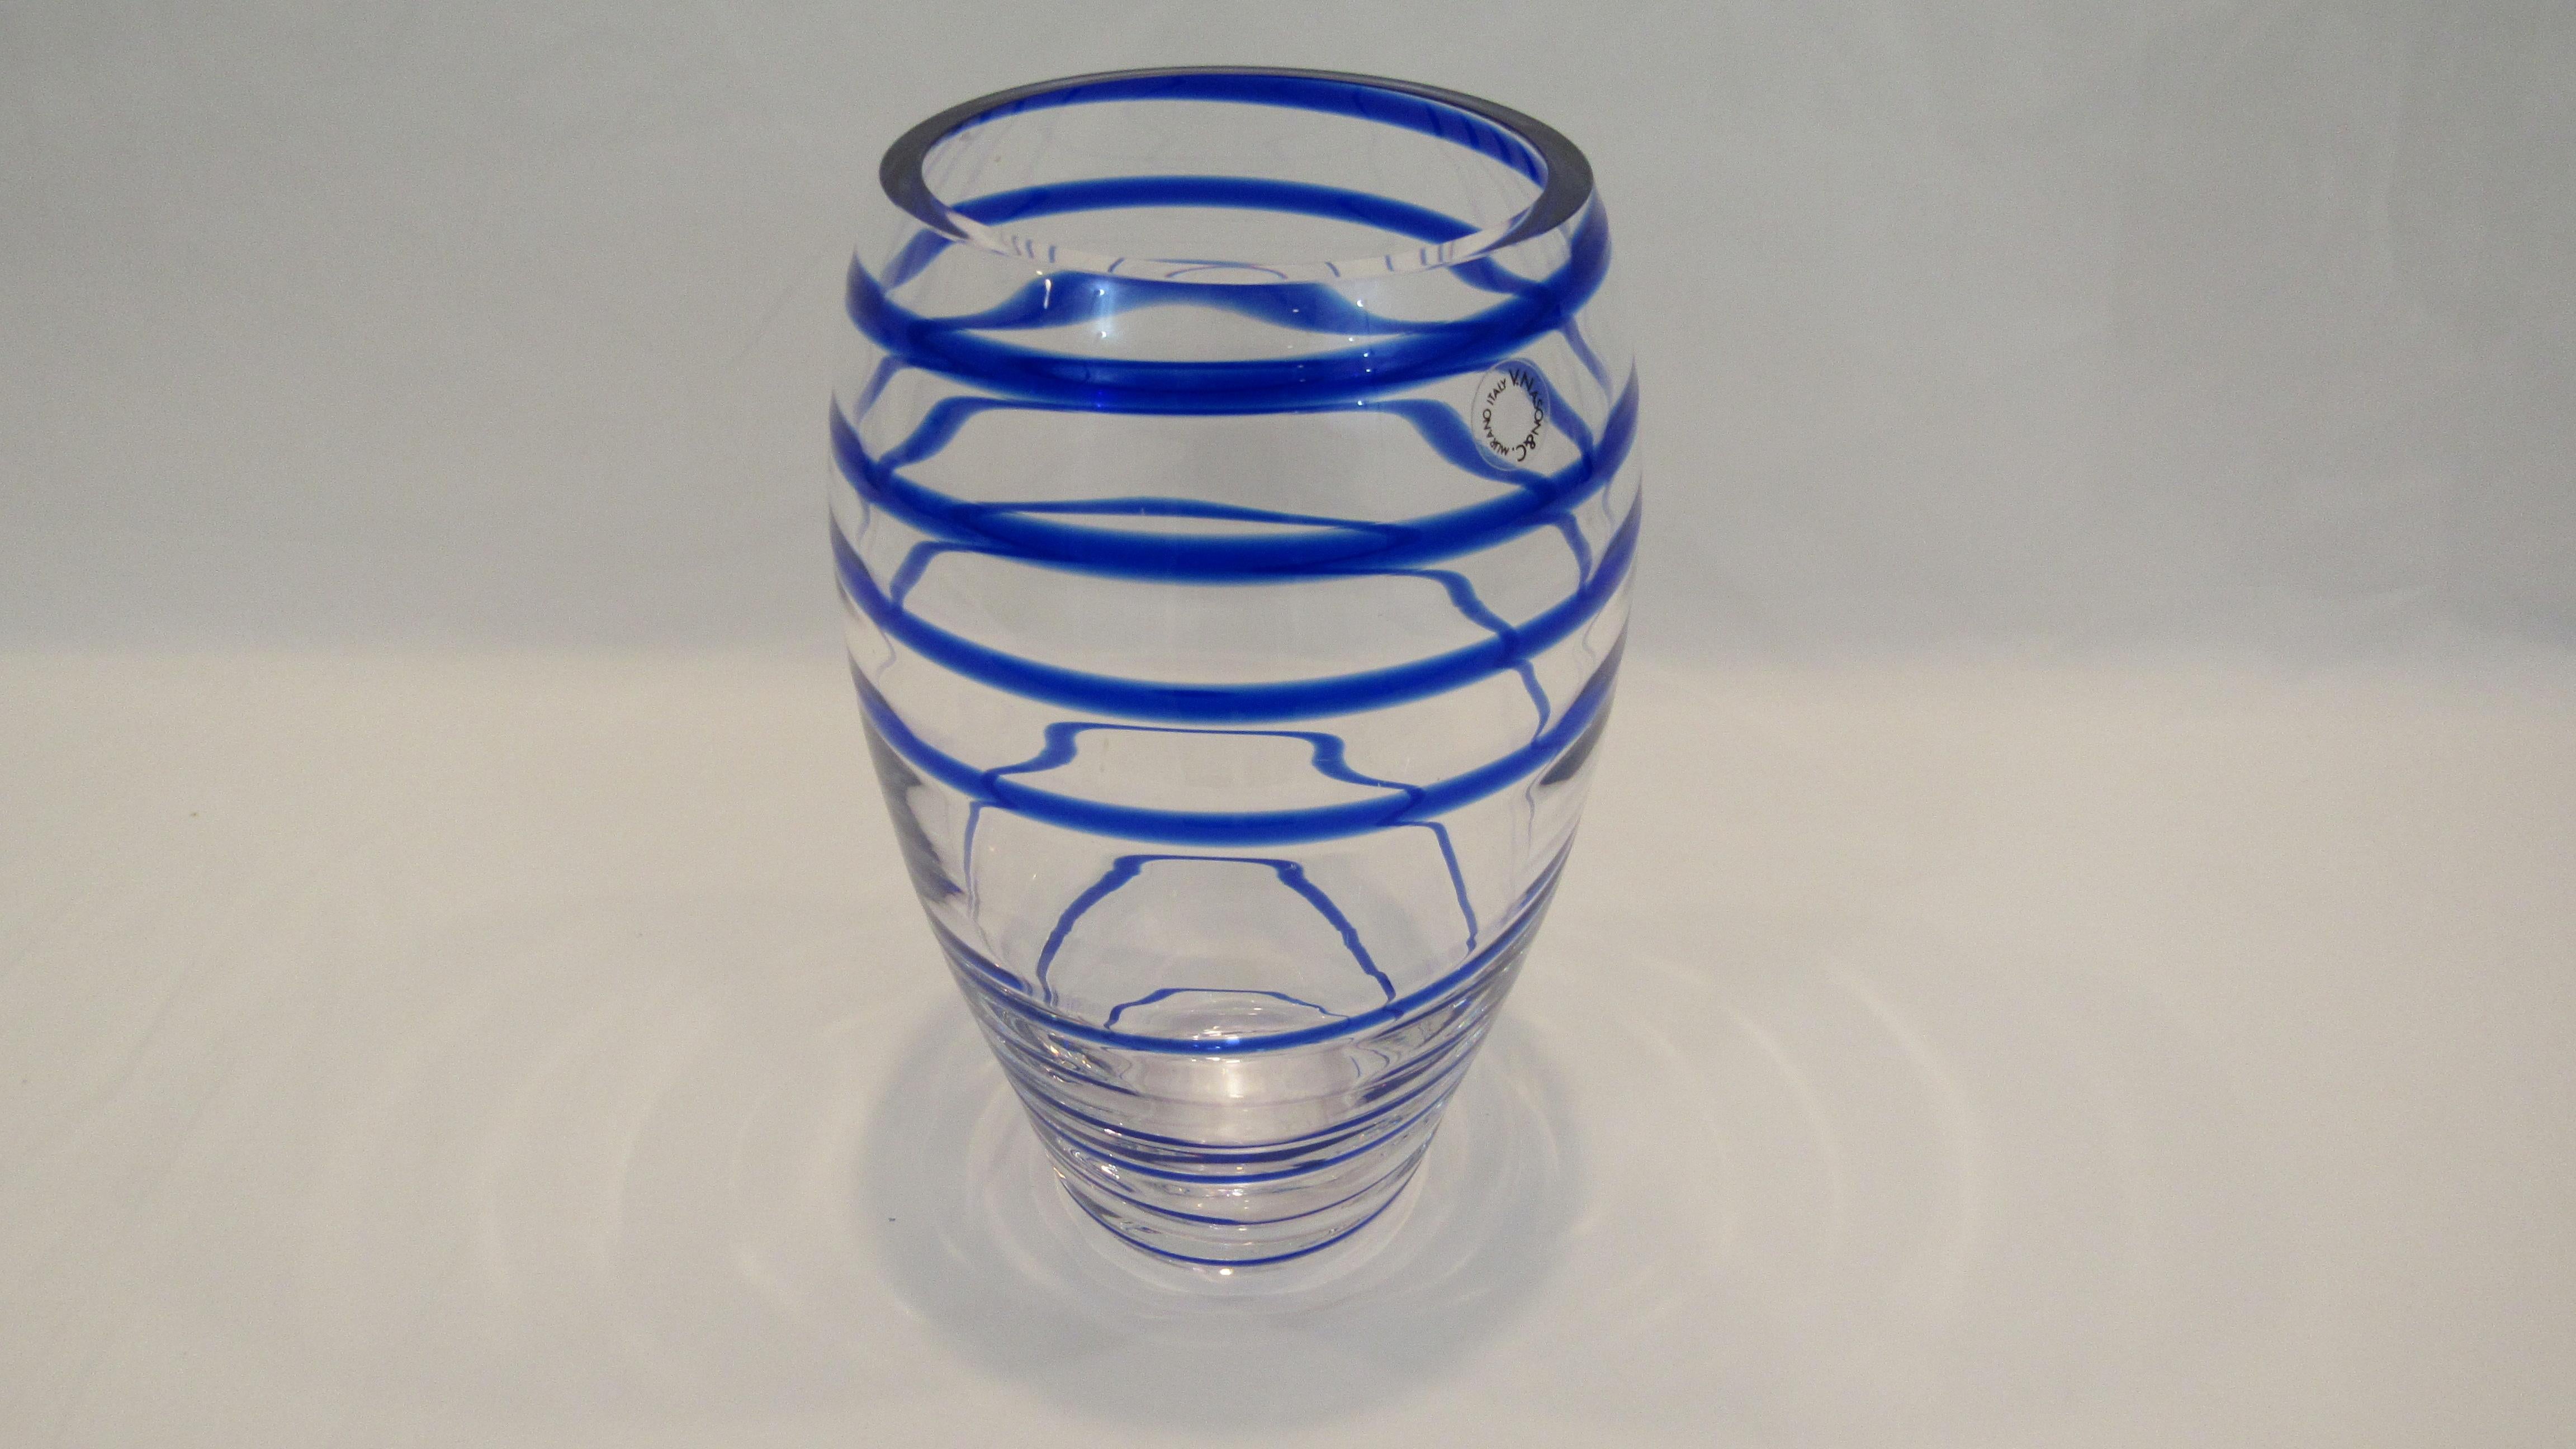 V. Nason & C. Italian Murano glass vase with blue spiral stripe offered for sale is an Italian blue spiral stripe Murano glass vase by V. Nason & C. This mouth-blown glass vase is created in a transparent and blue spiral color and retains the